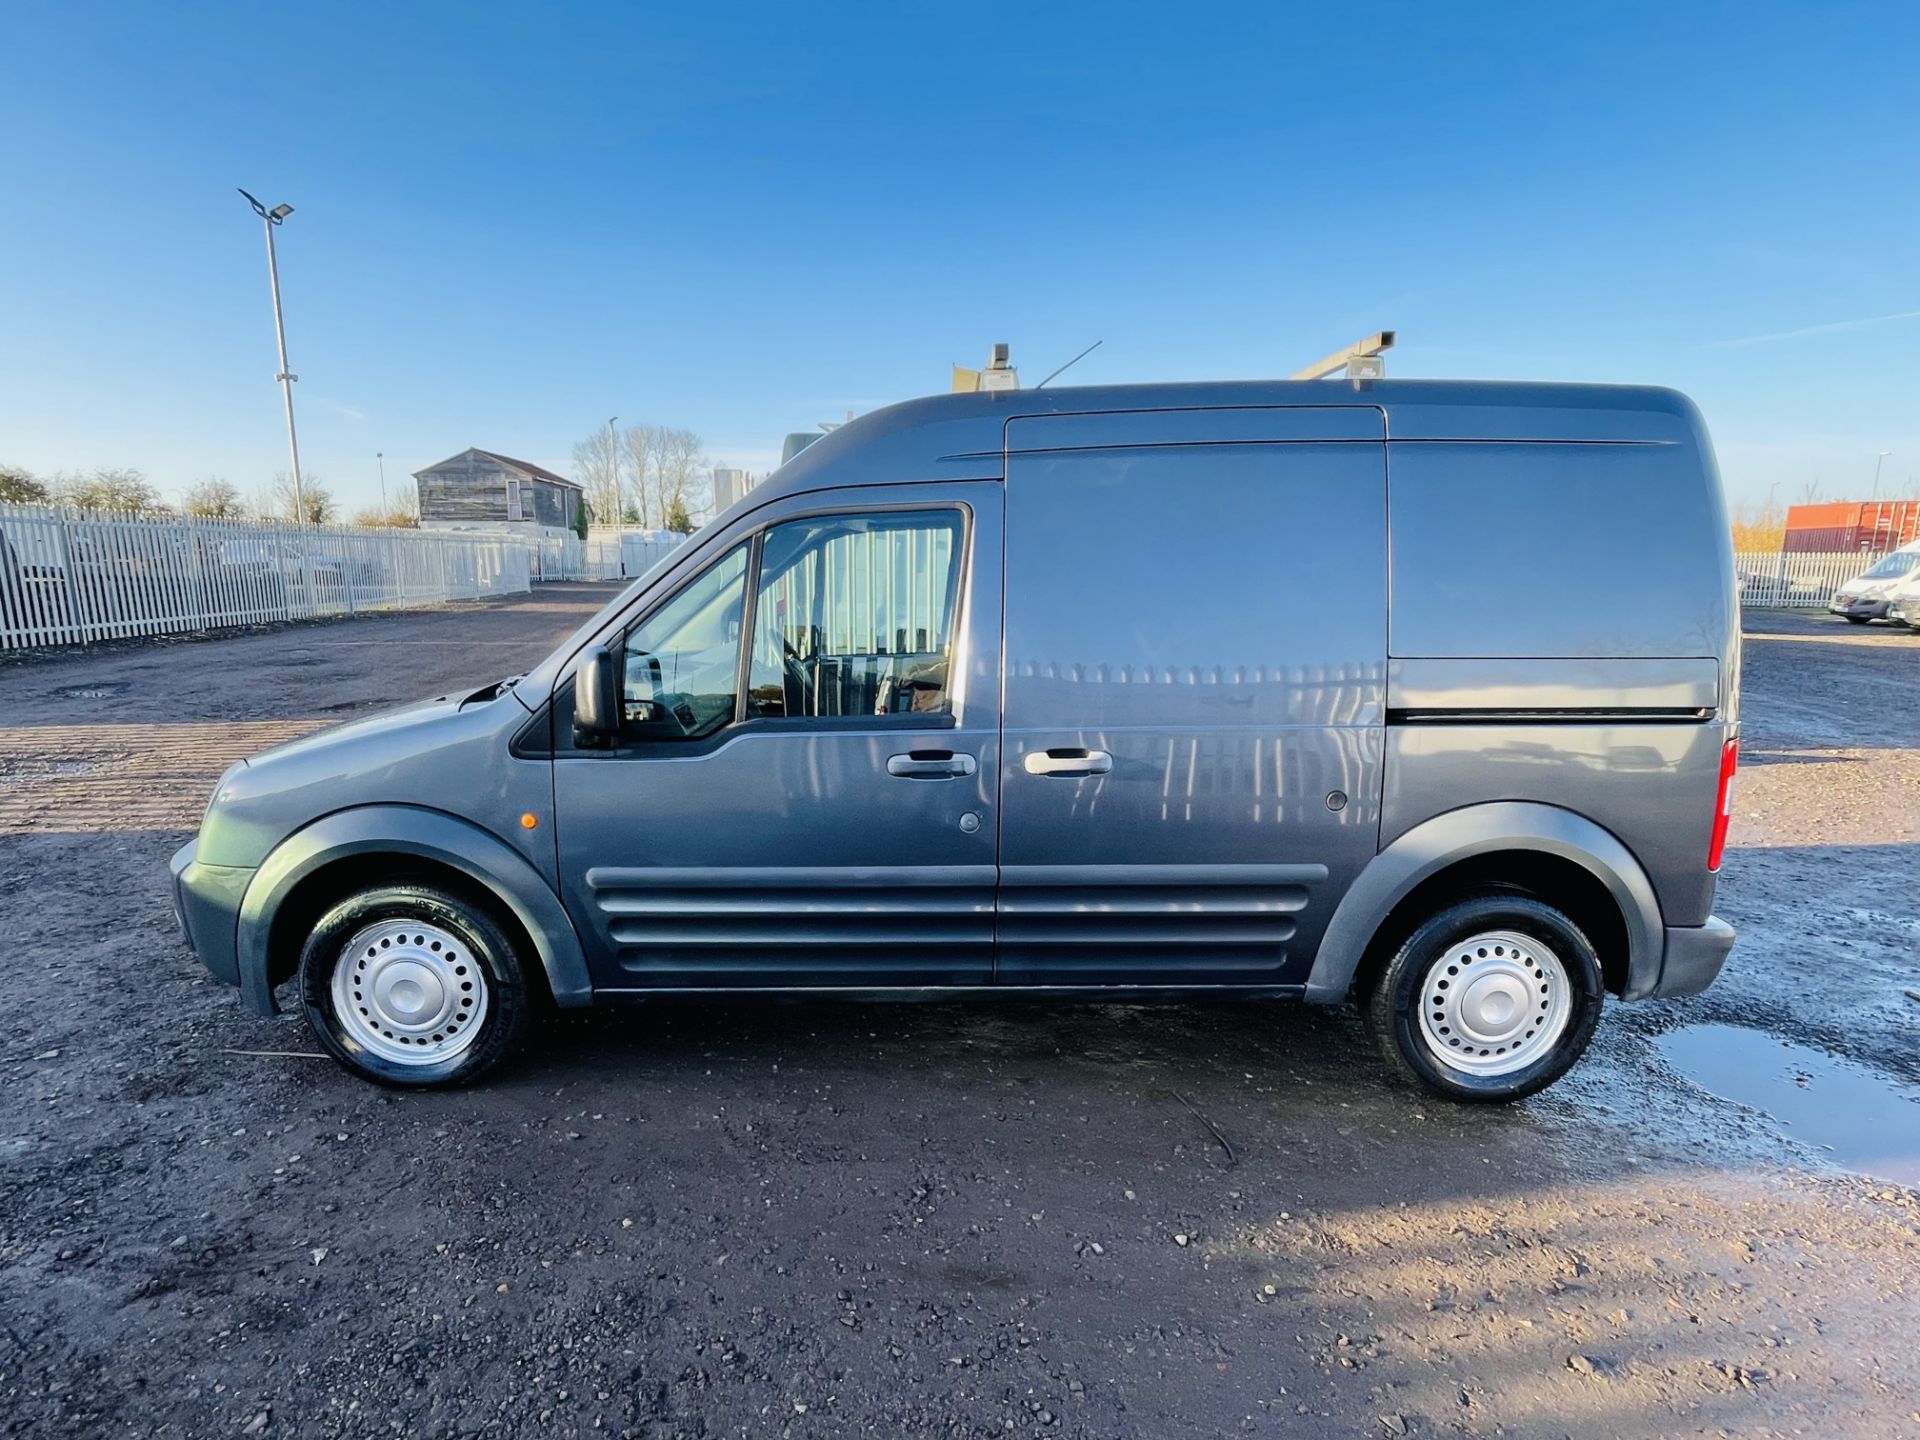 Ford Transit Connect 1.8 TDCI T230 LX110 LWB High Roof 2007 '57 Reg' A/C - No vat save 20% - Image 7 of 20